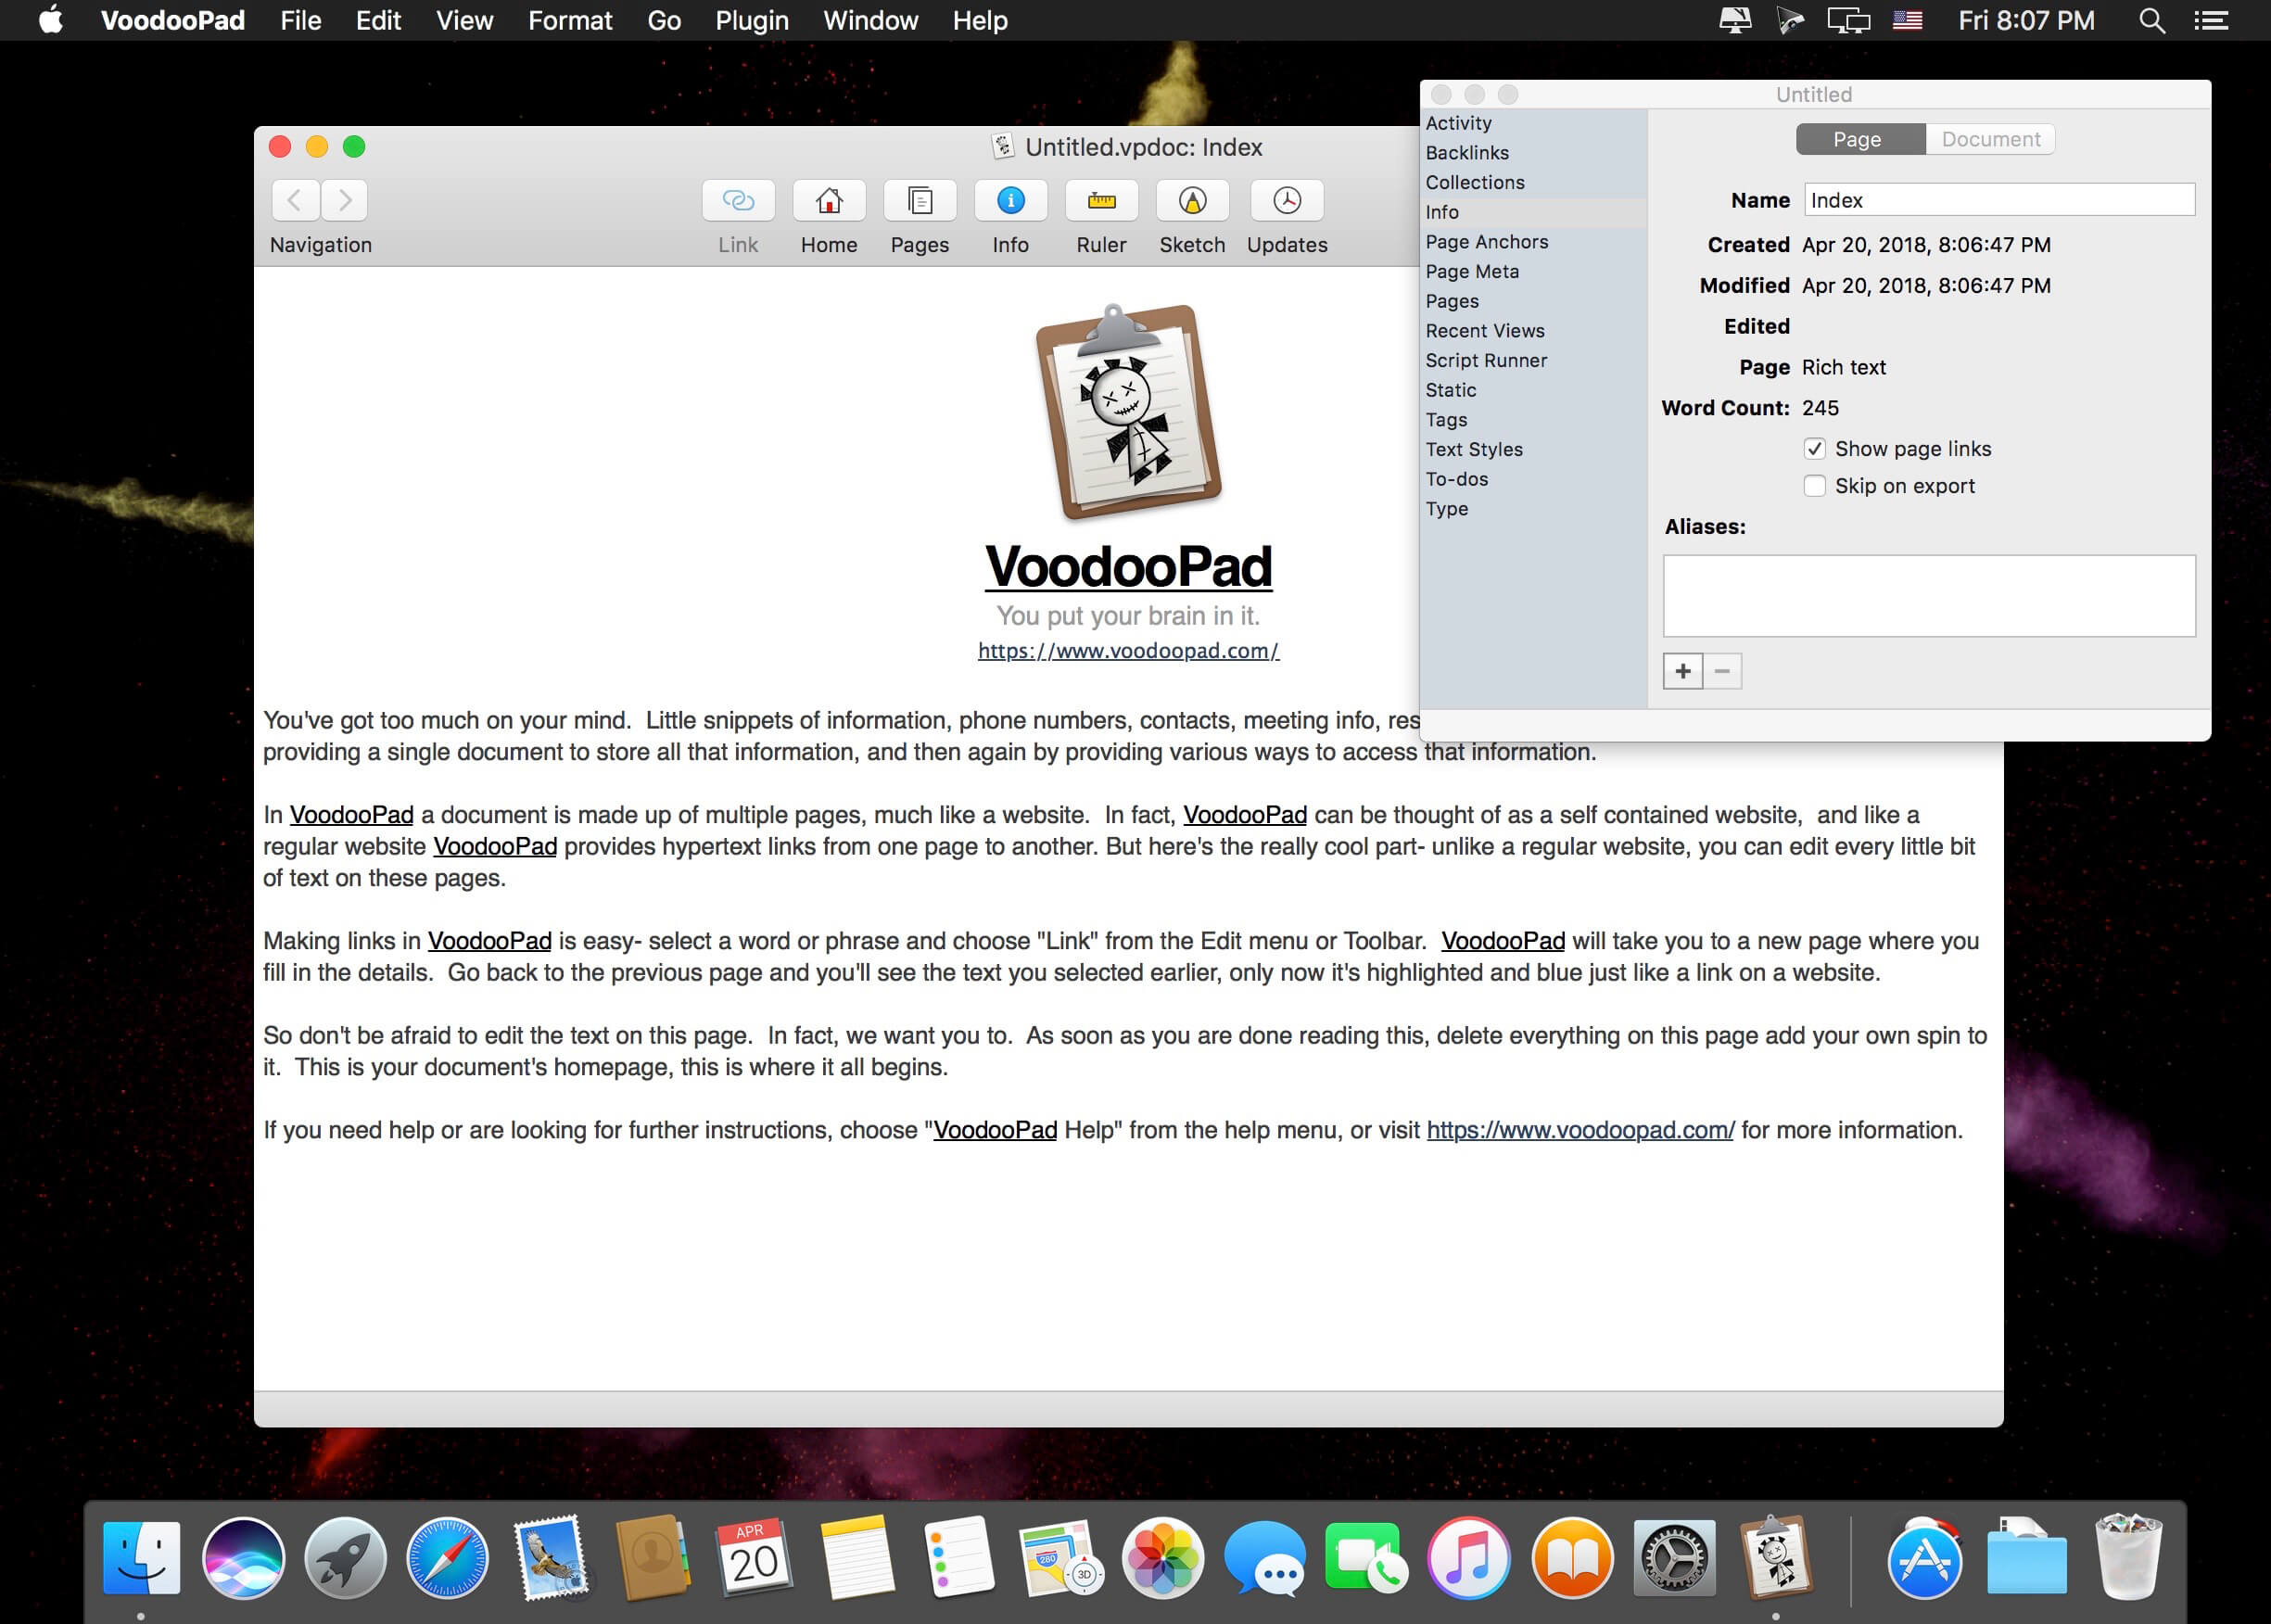 voodoopad documents lost their custom icons